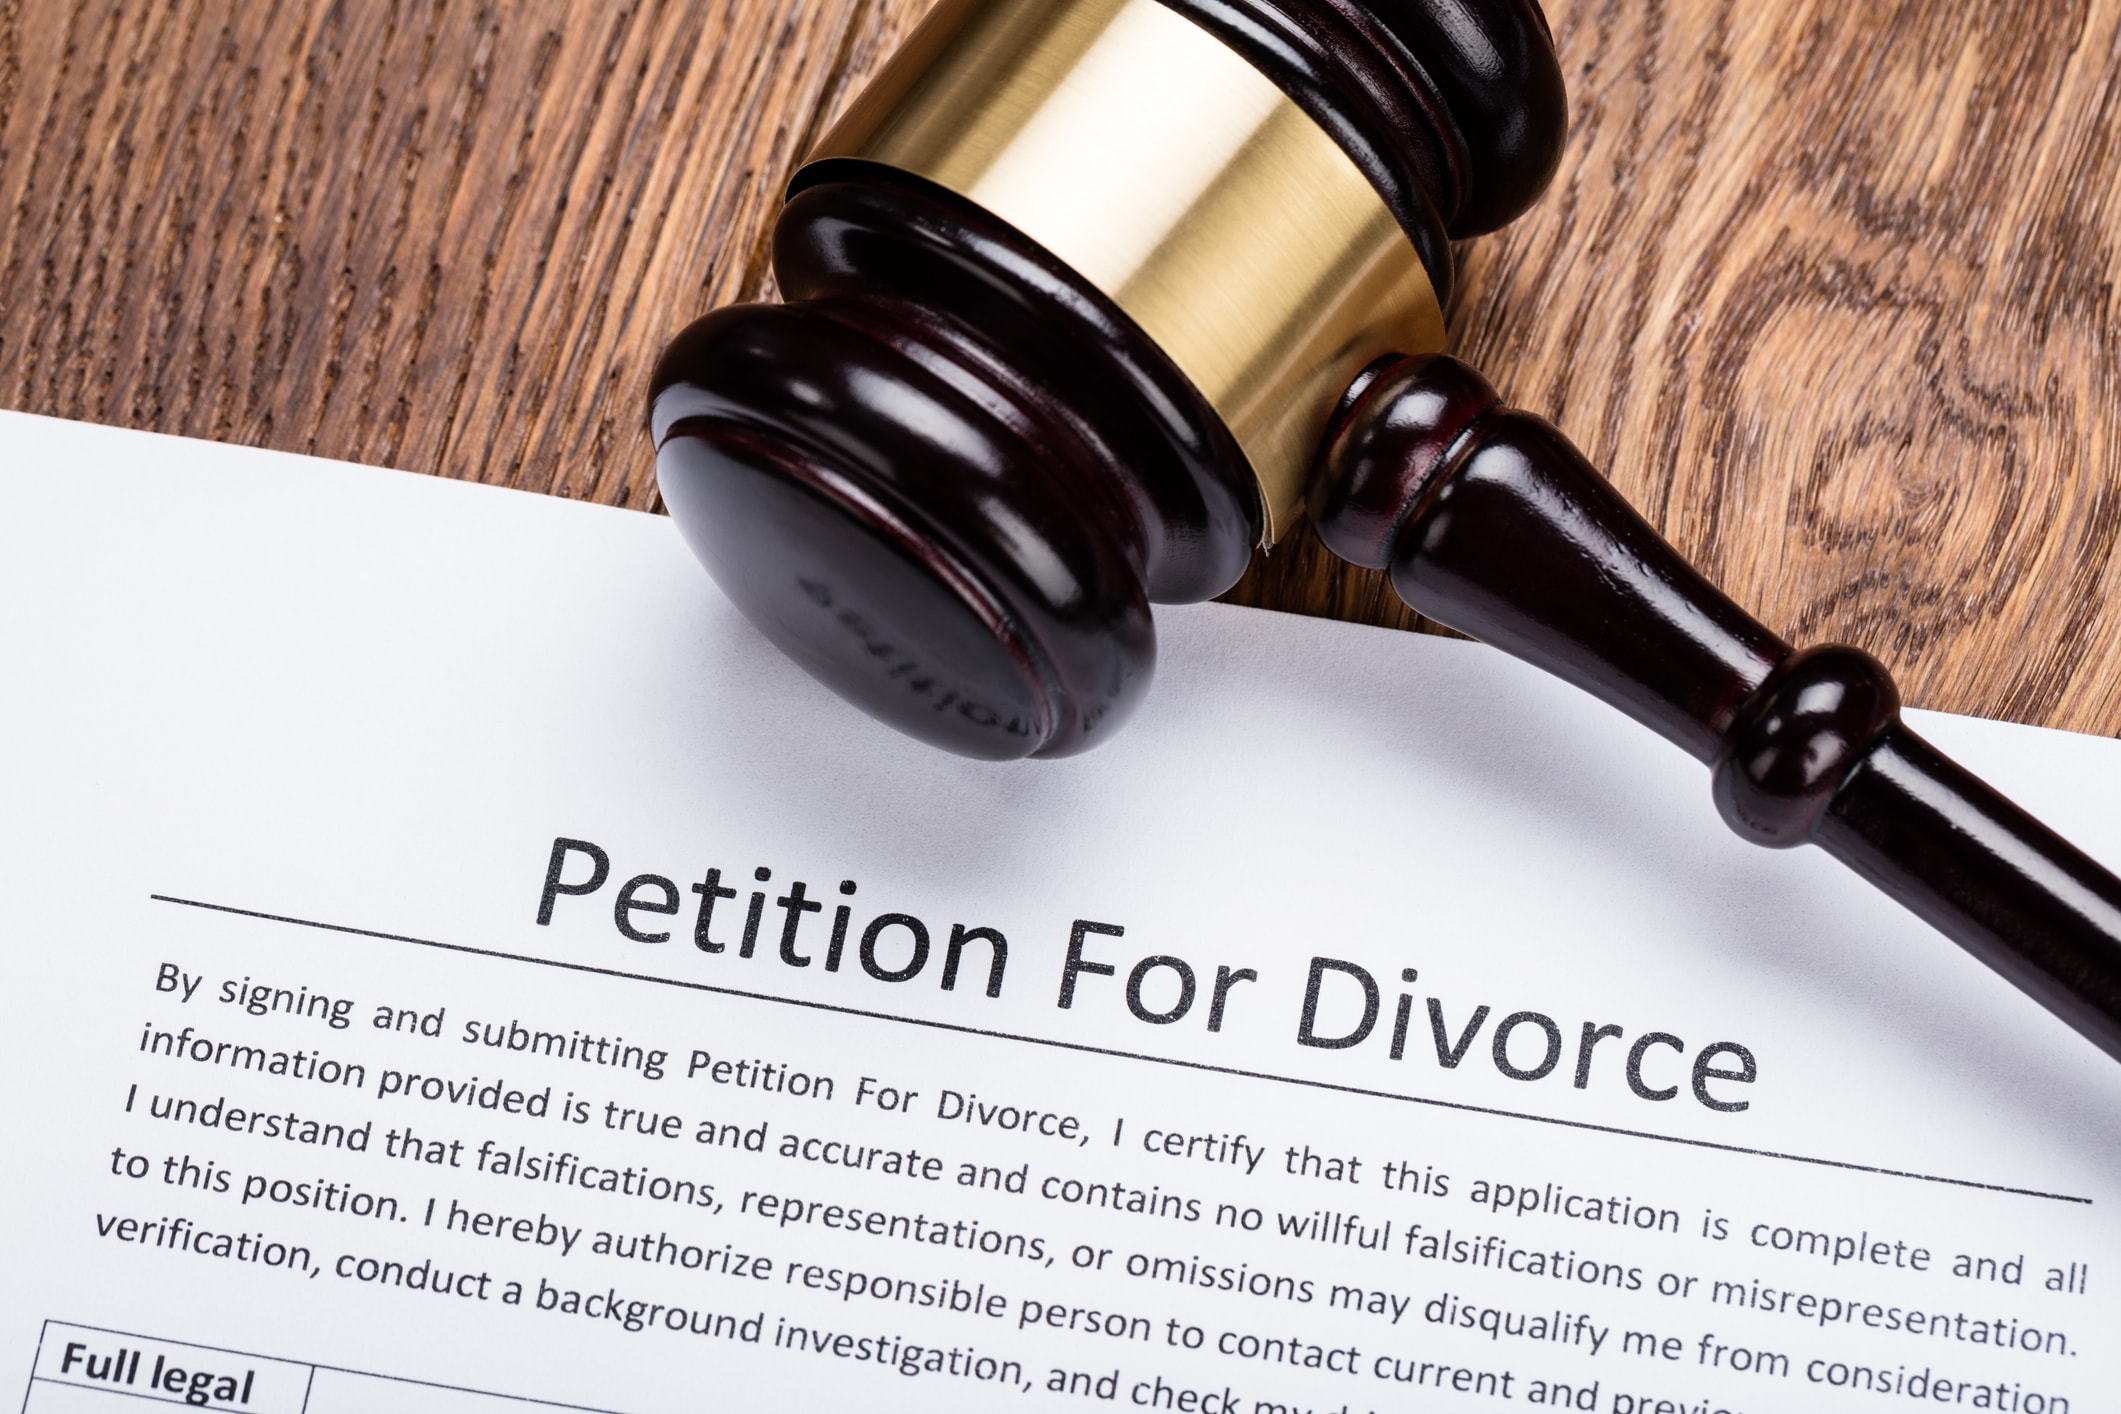 Place Your of Dissolution of Marriage Notice - Miami's Community News